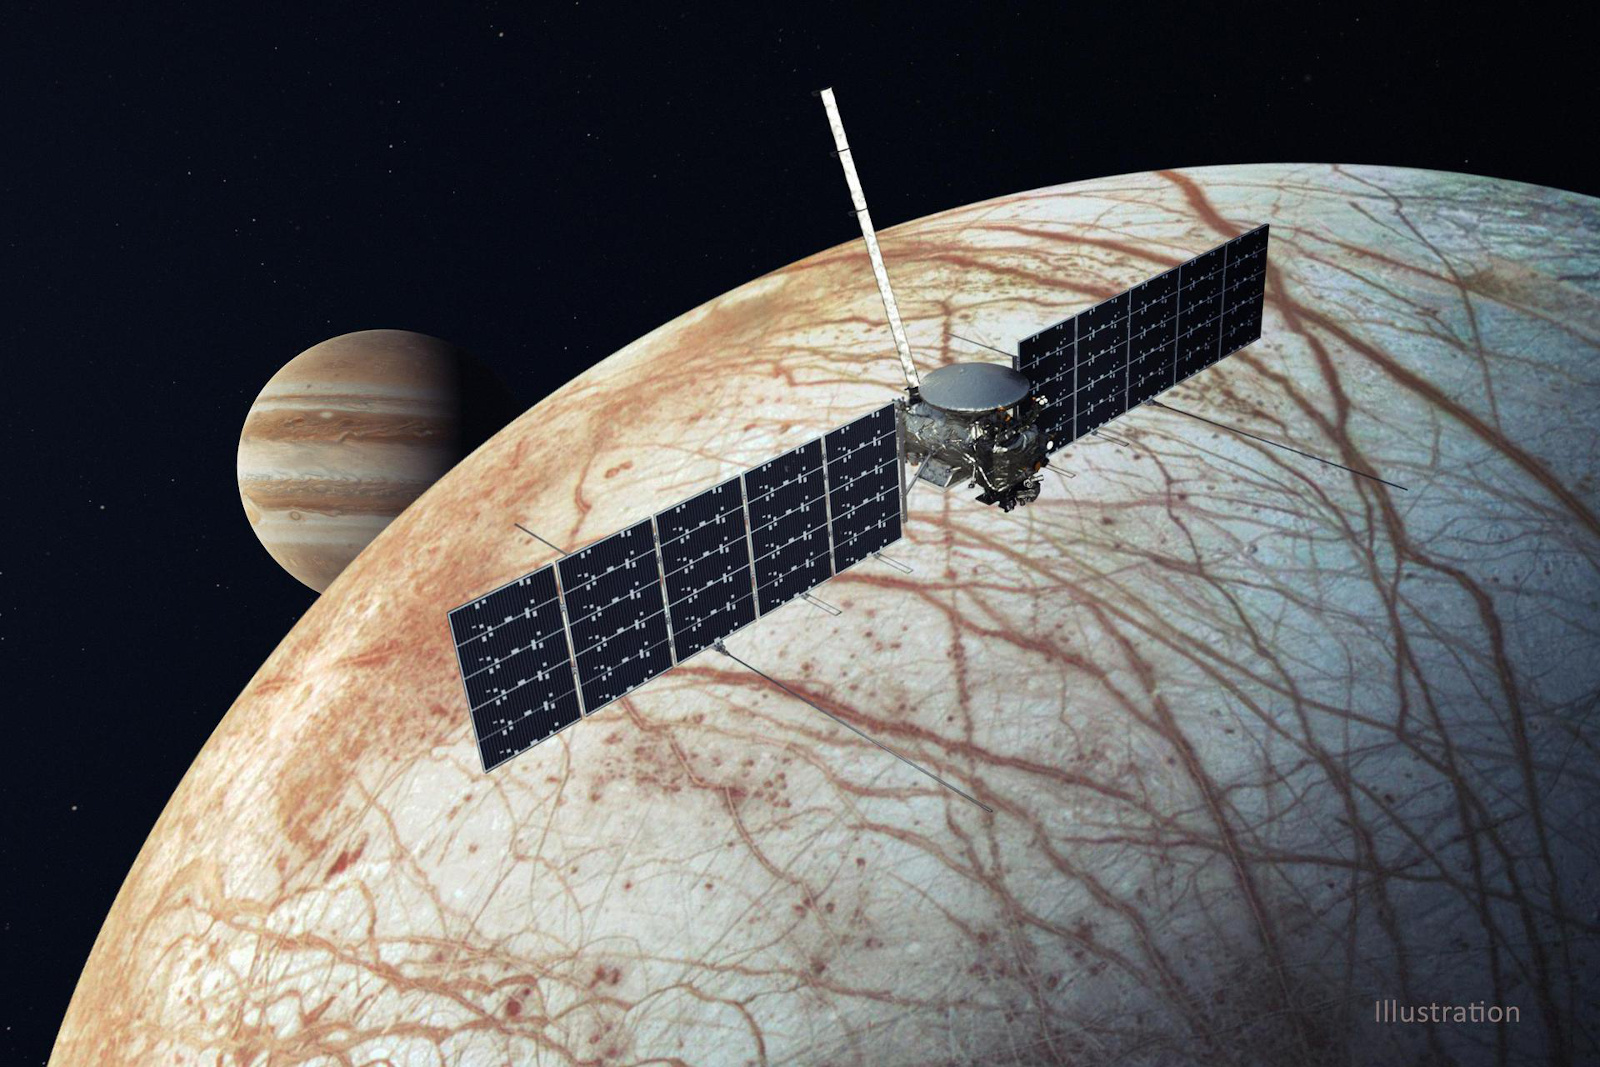 SpaceX will launch NASA’s Europa Clipper mission to Jupiter’s moon